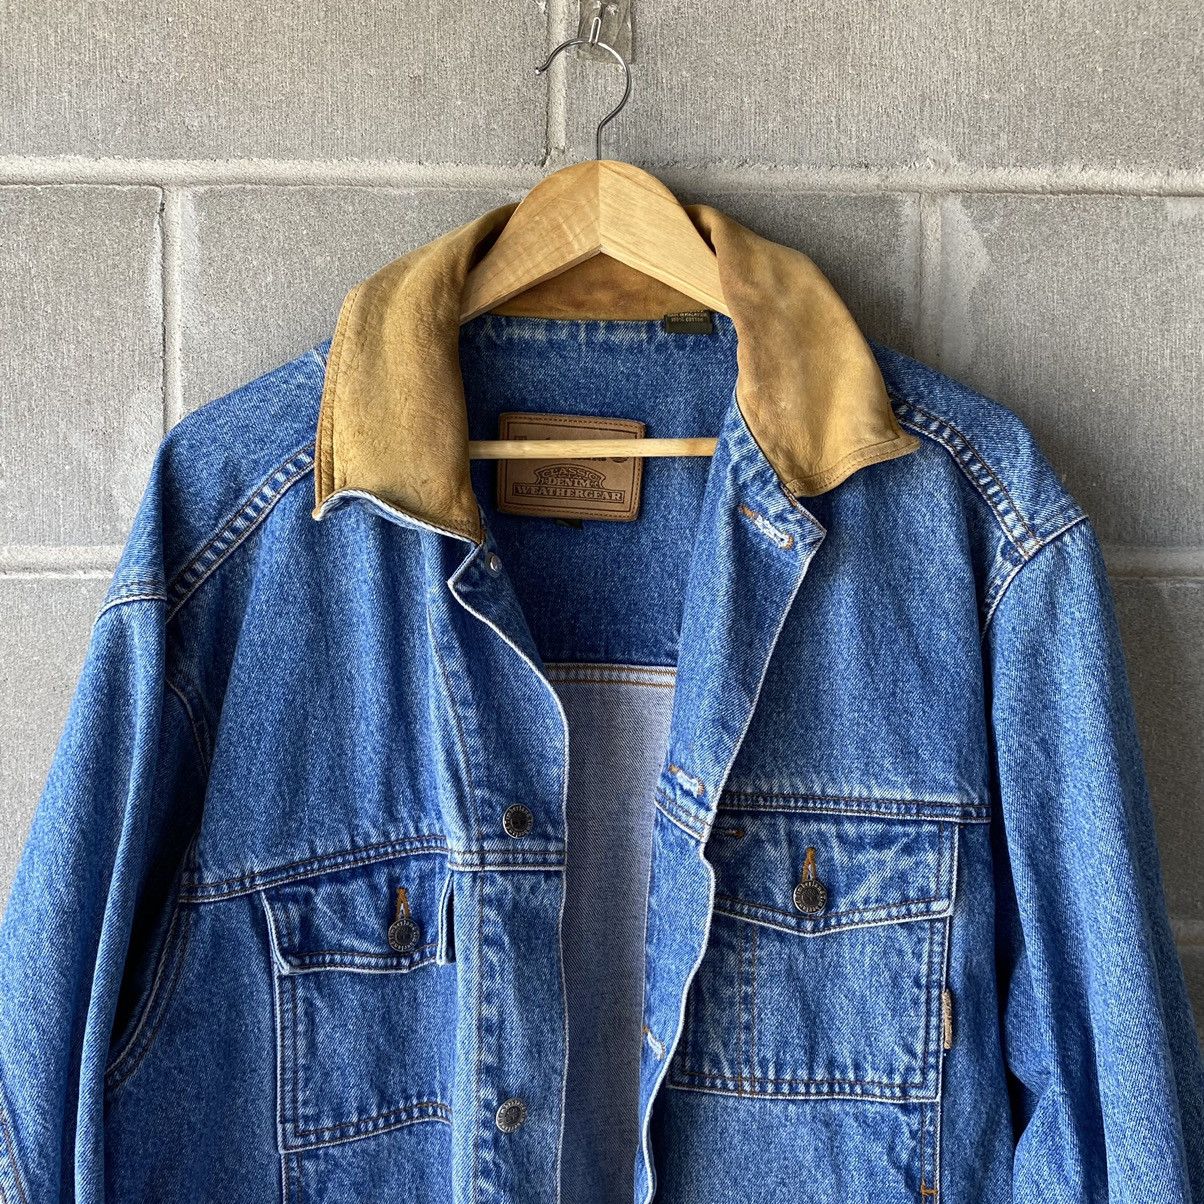 Timberland Timberland Denim Jacket with Suede Tan Collar | Grailed